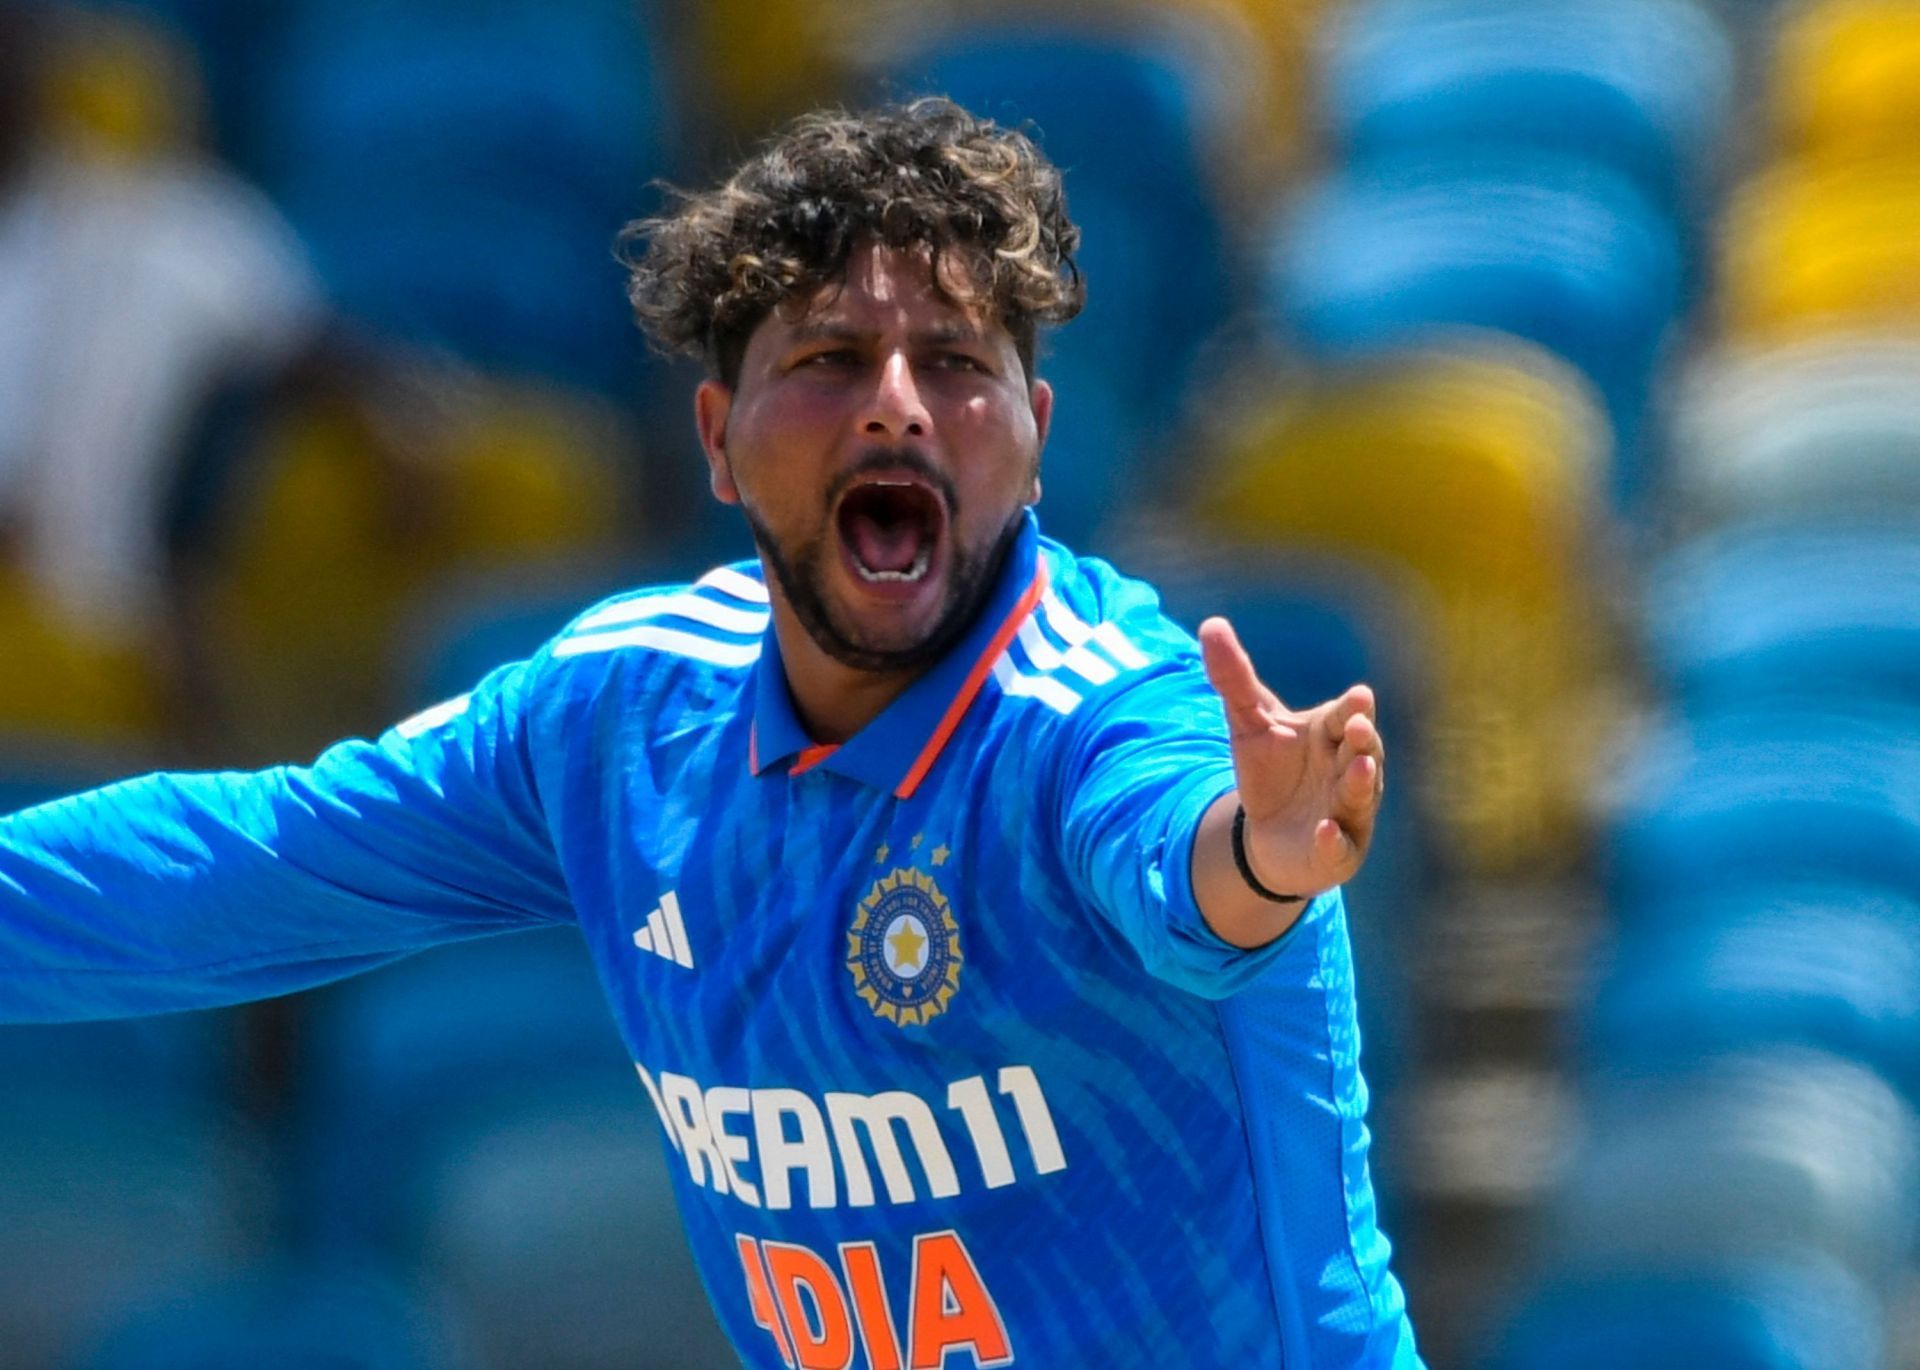 Kuldeep Yadav has been in excellent wicket-taking form lately. [P/C: BCCI]